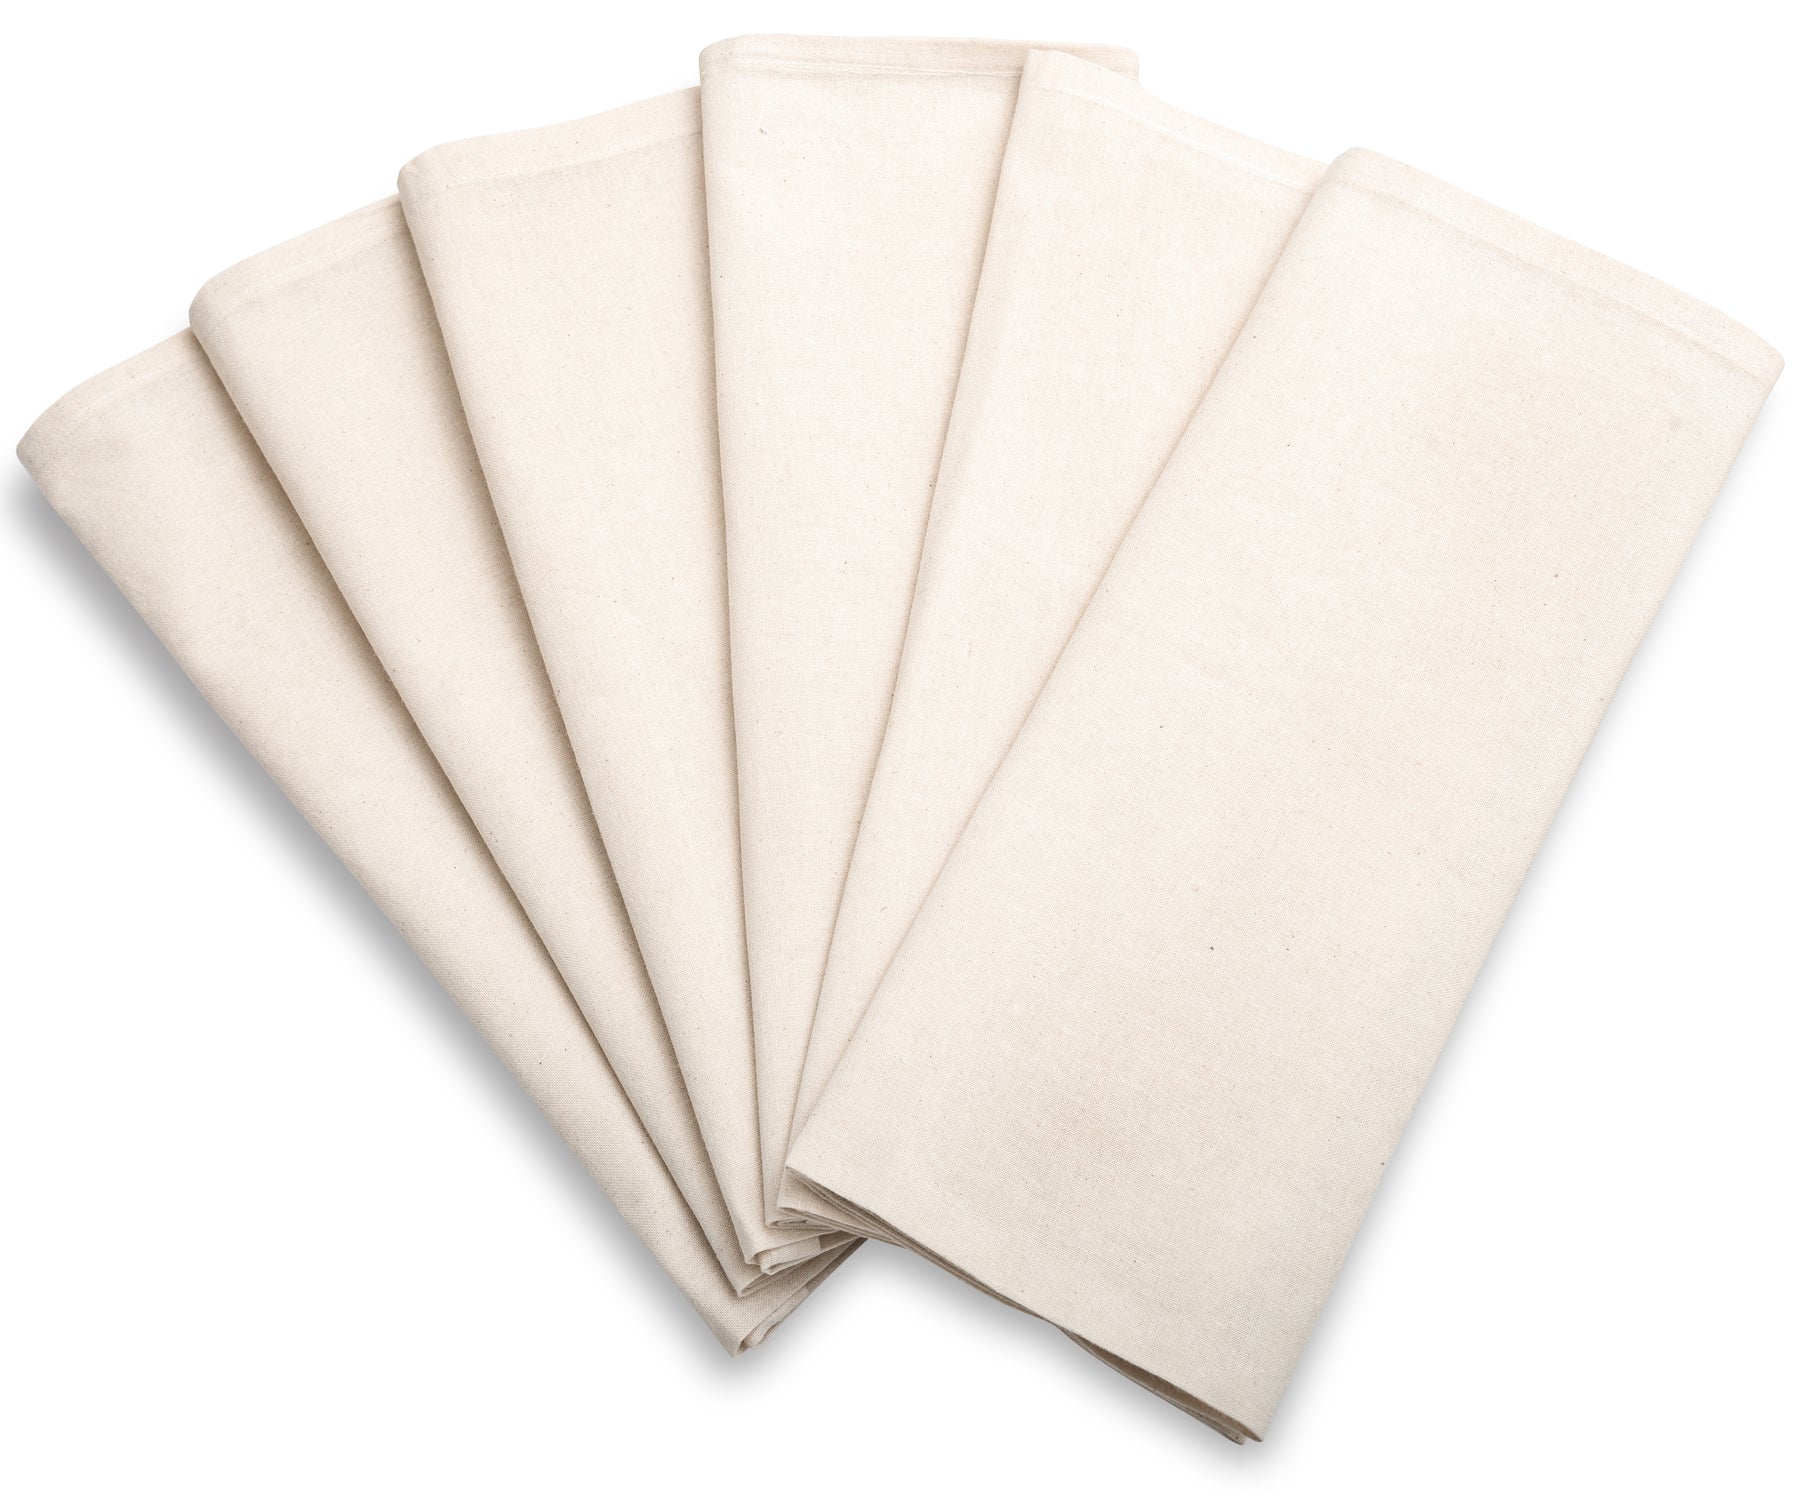 flour sack kitchen towels, grain sack towels or flour sack hand towels are most absorbent. easter dish towels.